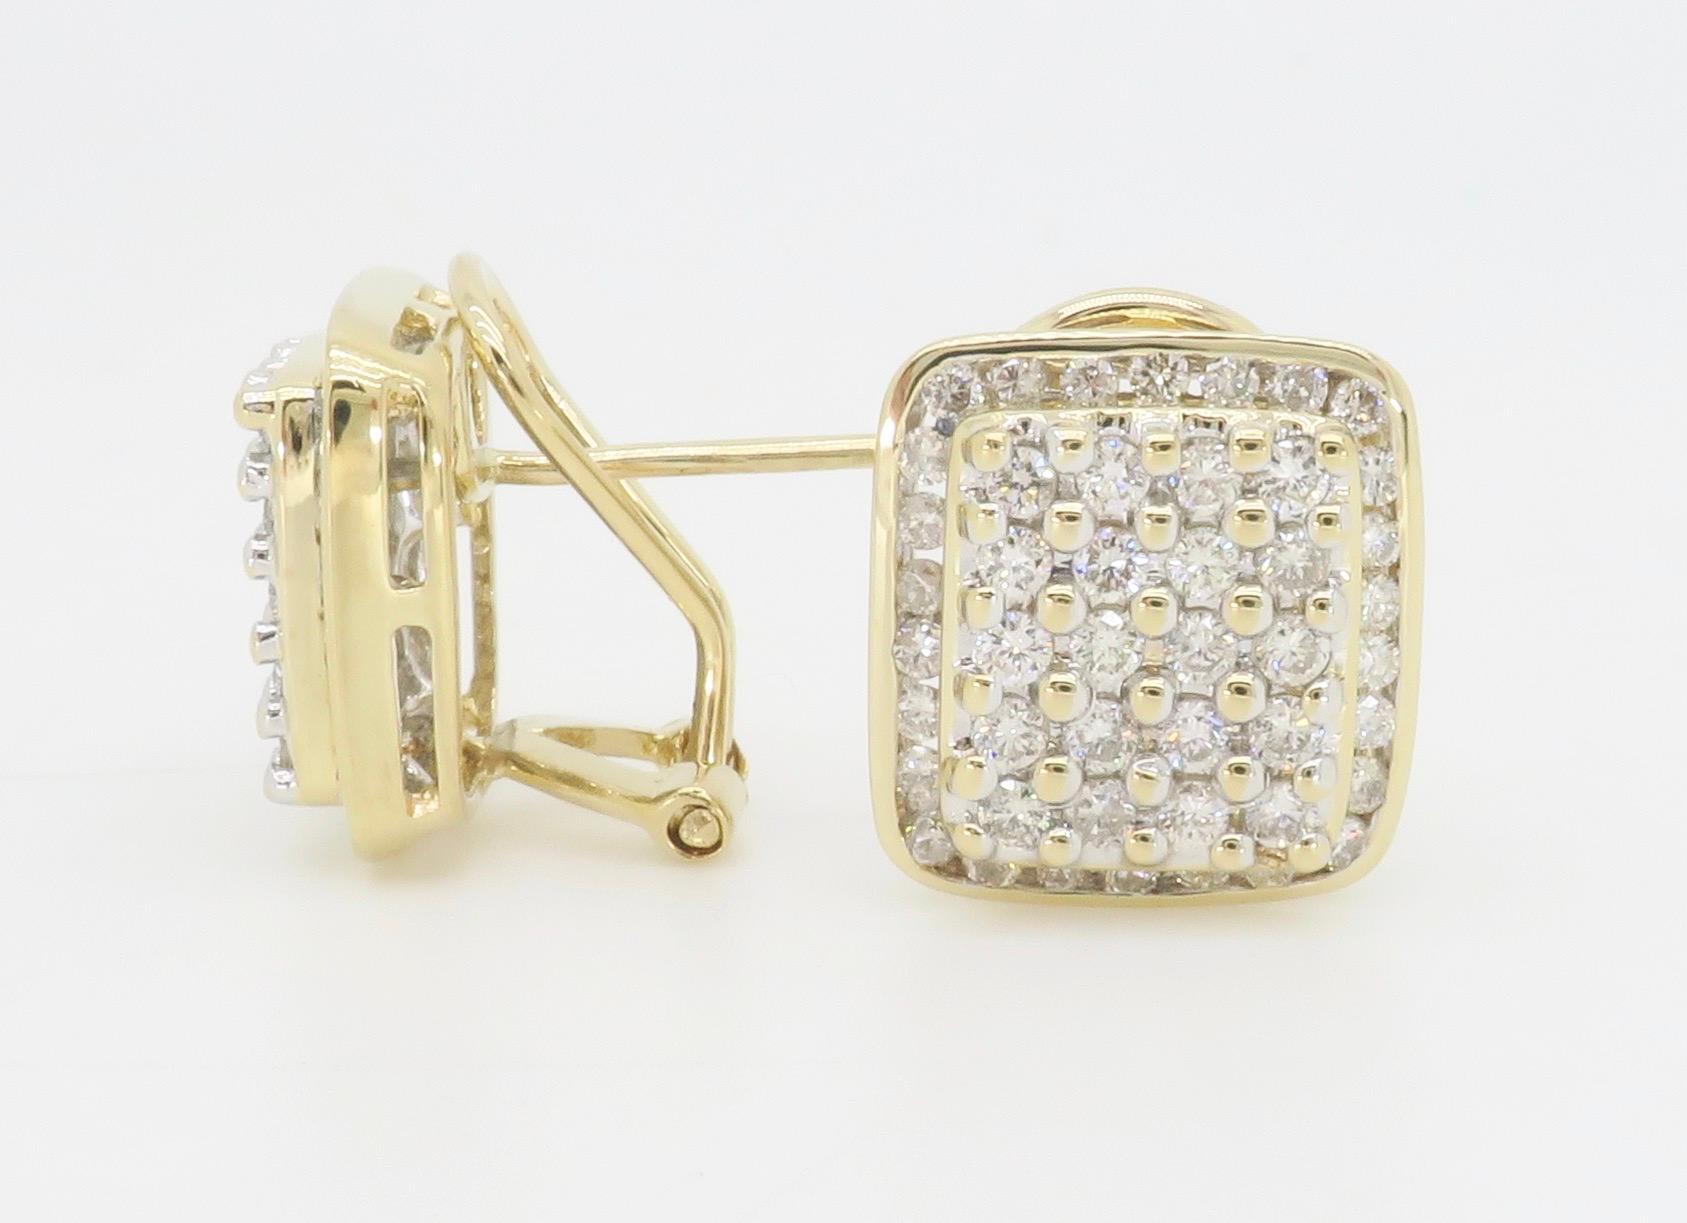 Block-Style Diamond Cluster Earrings Made in 14k Yellow Gold In Excellent Condition For Sale In Webster, NY